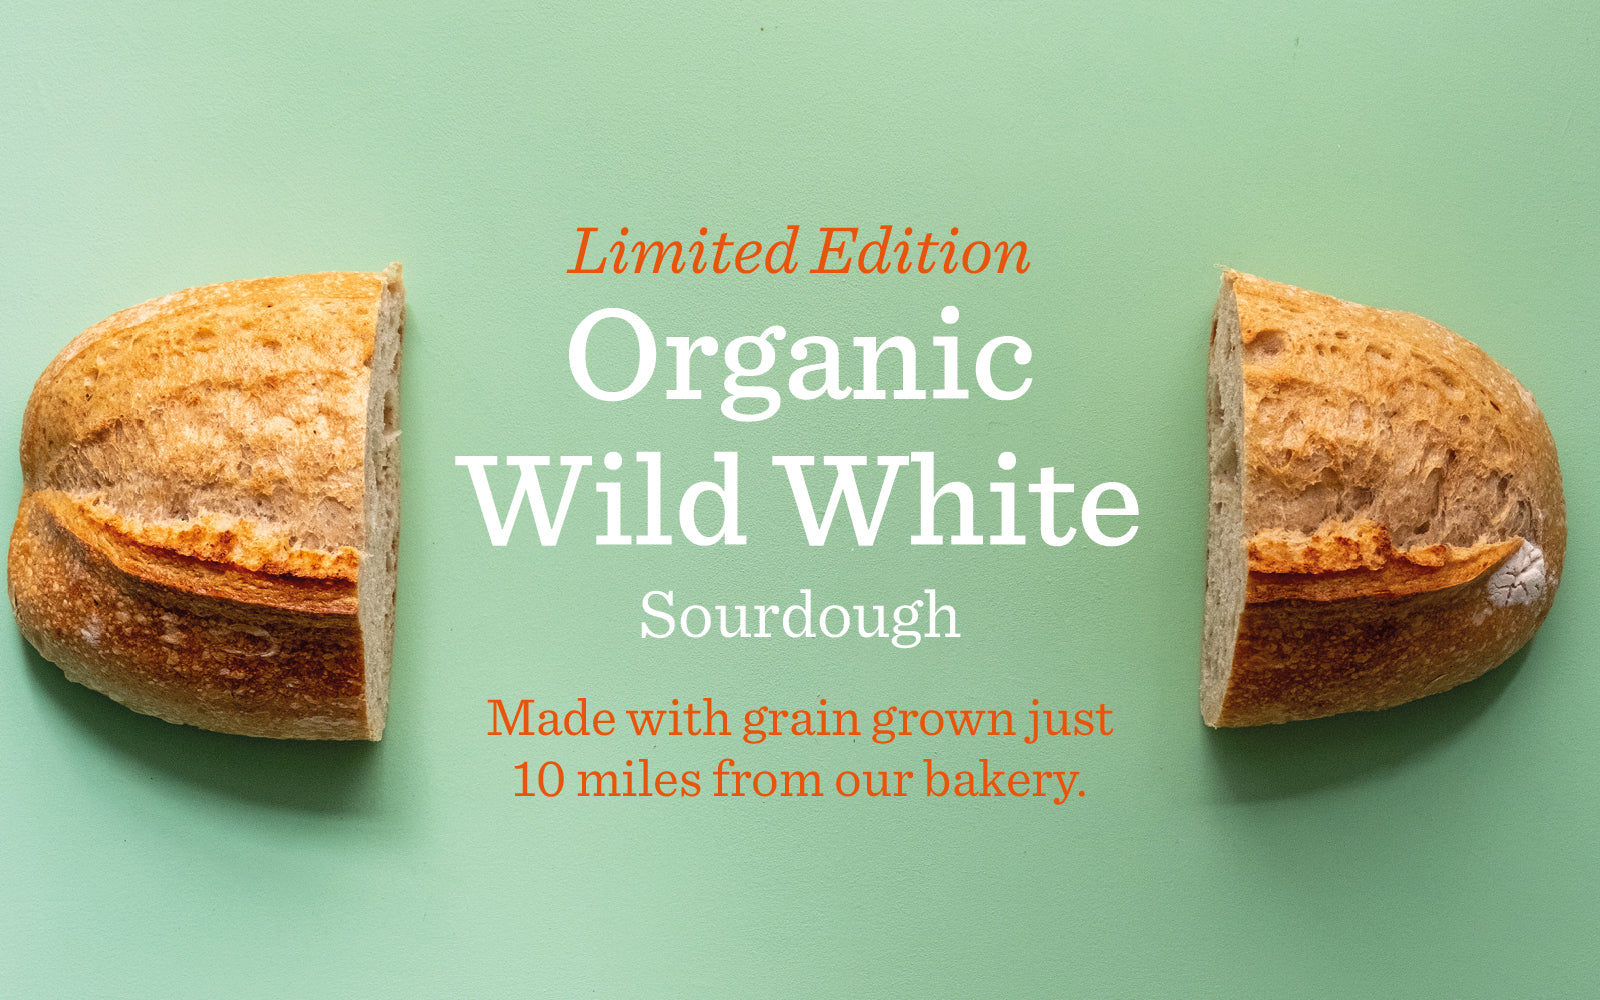 Introducing: Limited Edition Wild White